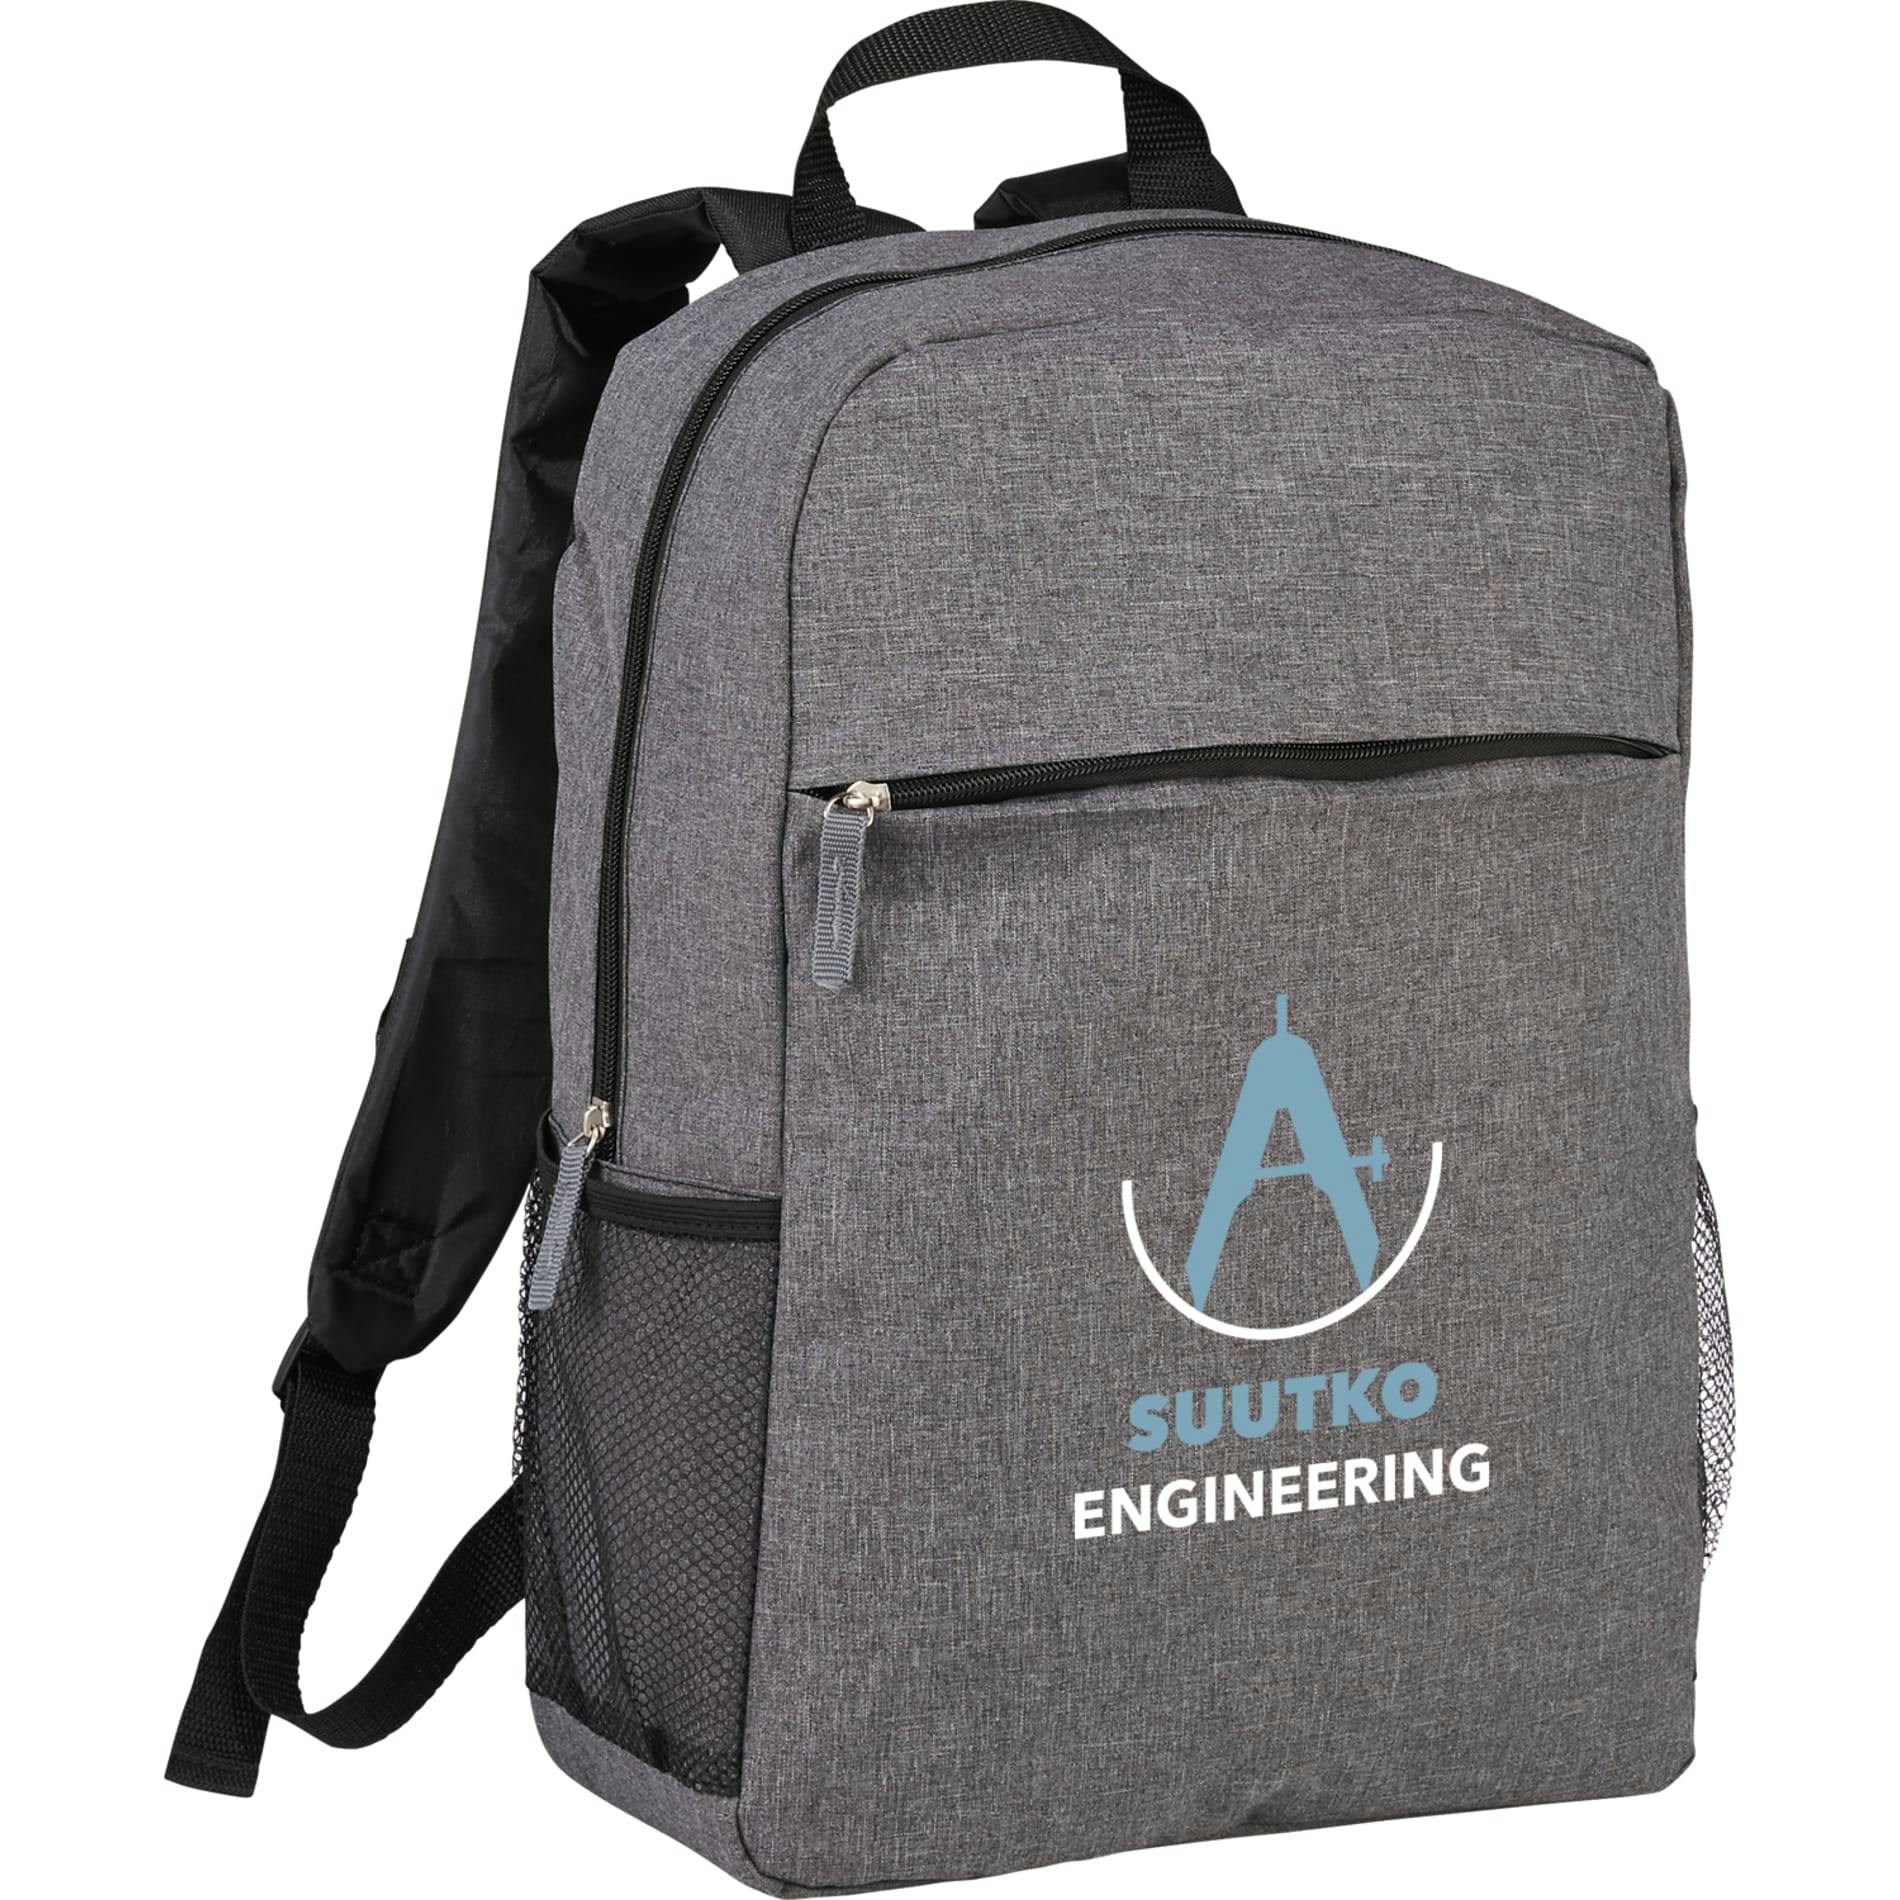 Urban 15" Computer Backpack - additional Image 3